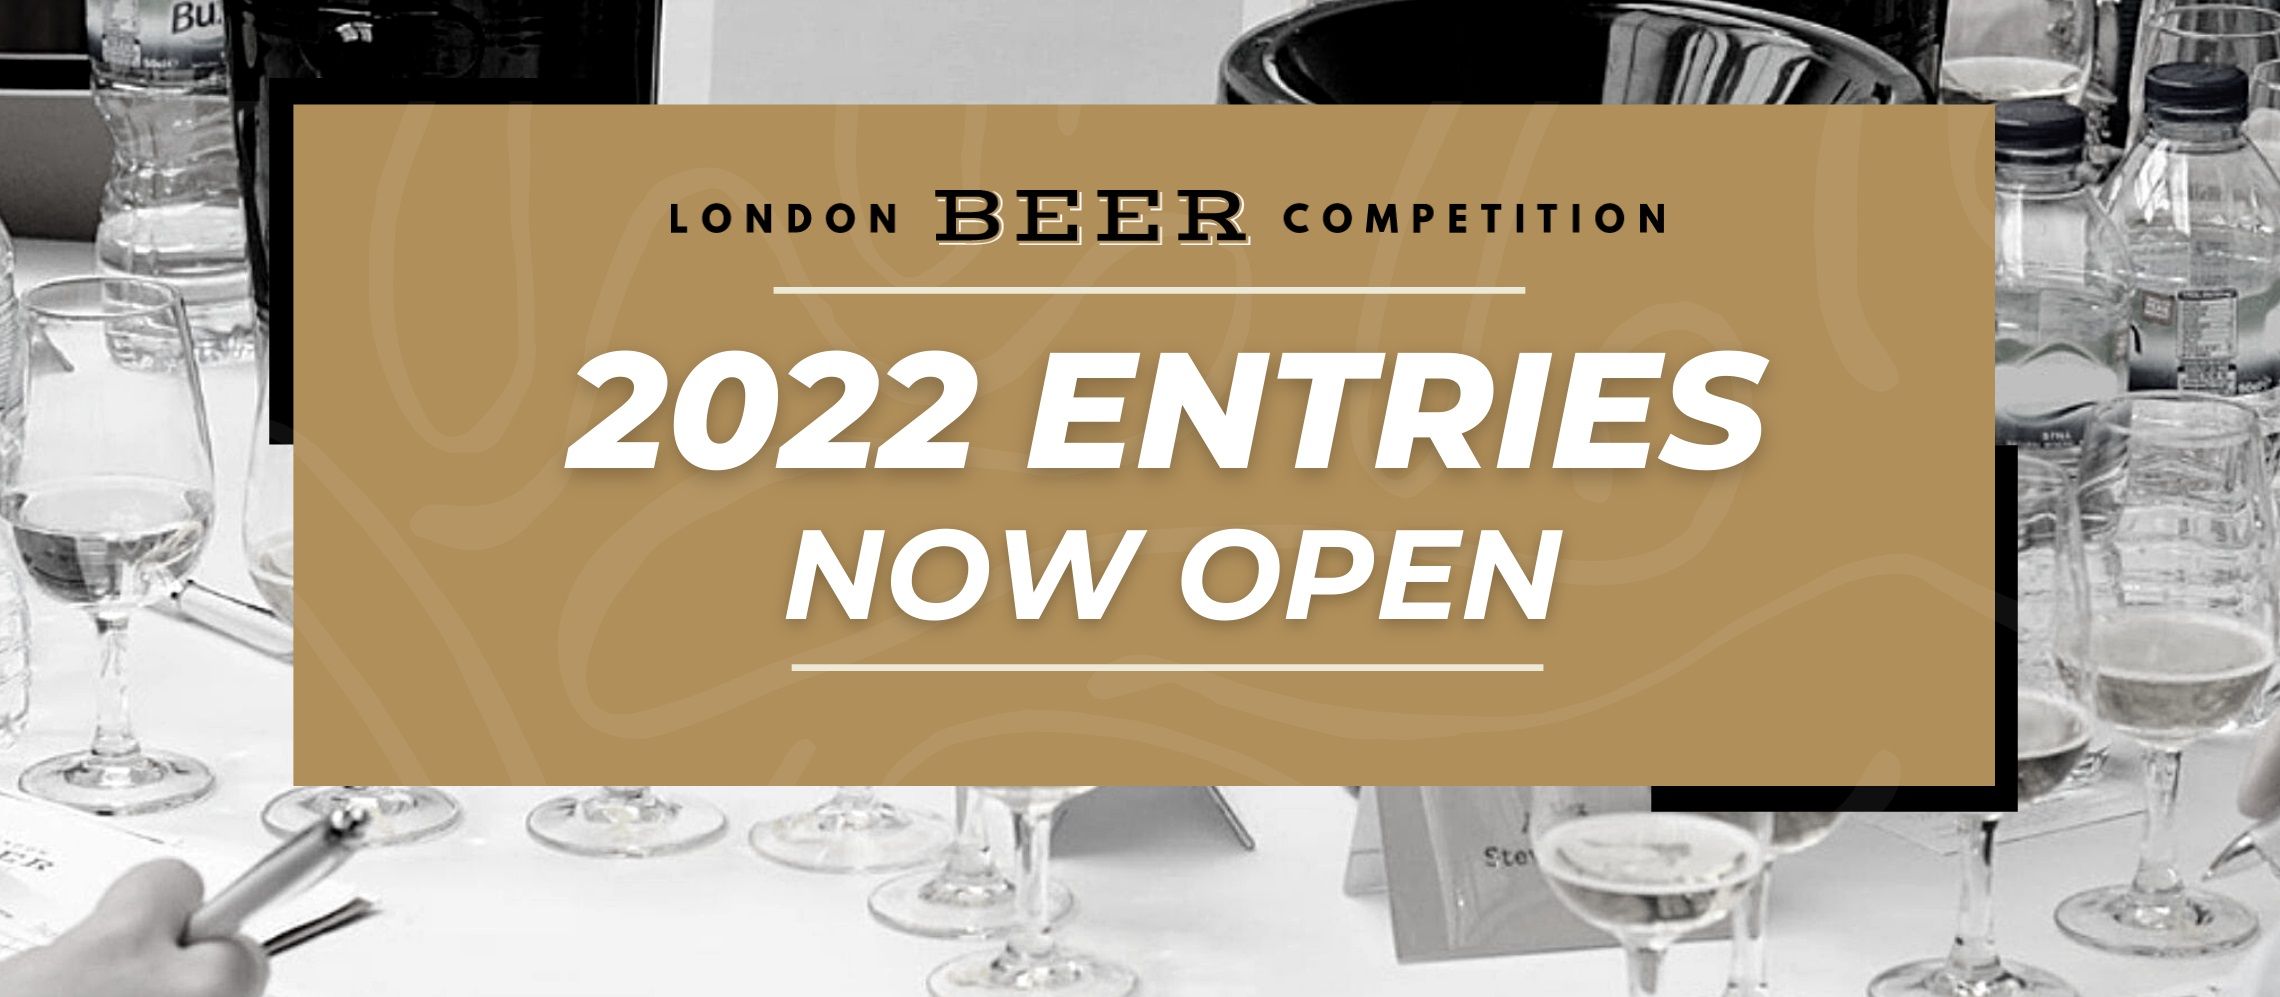 Photo for: London Beer Competition 2022 - Submission Now Open